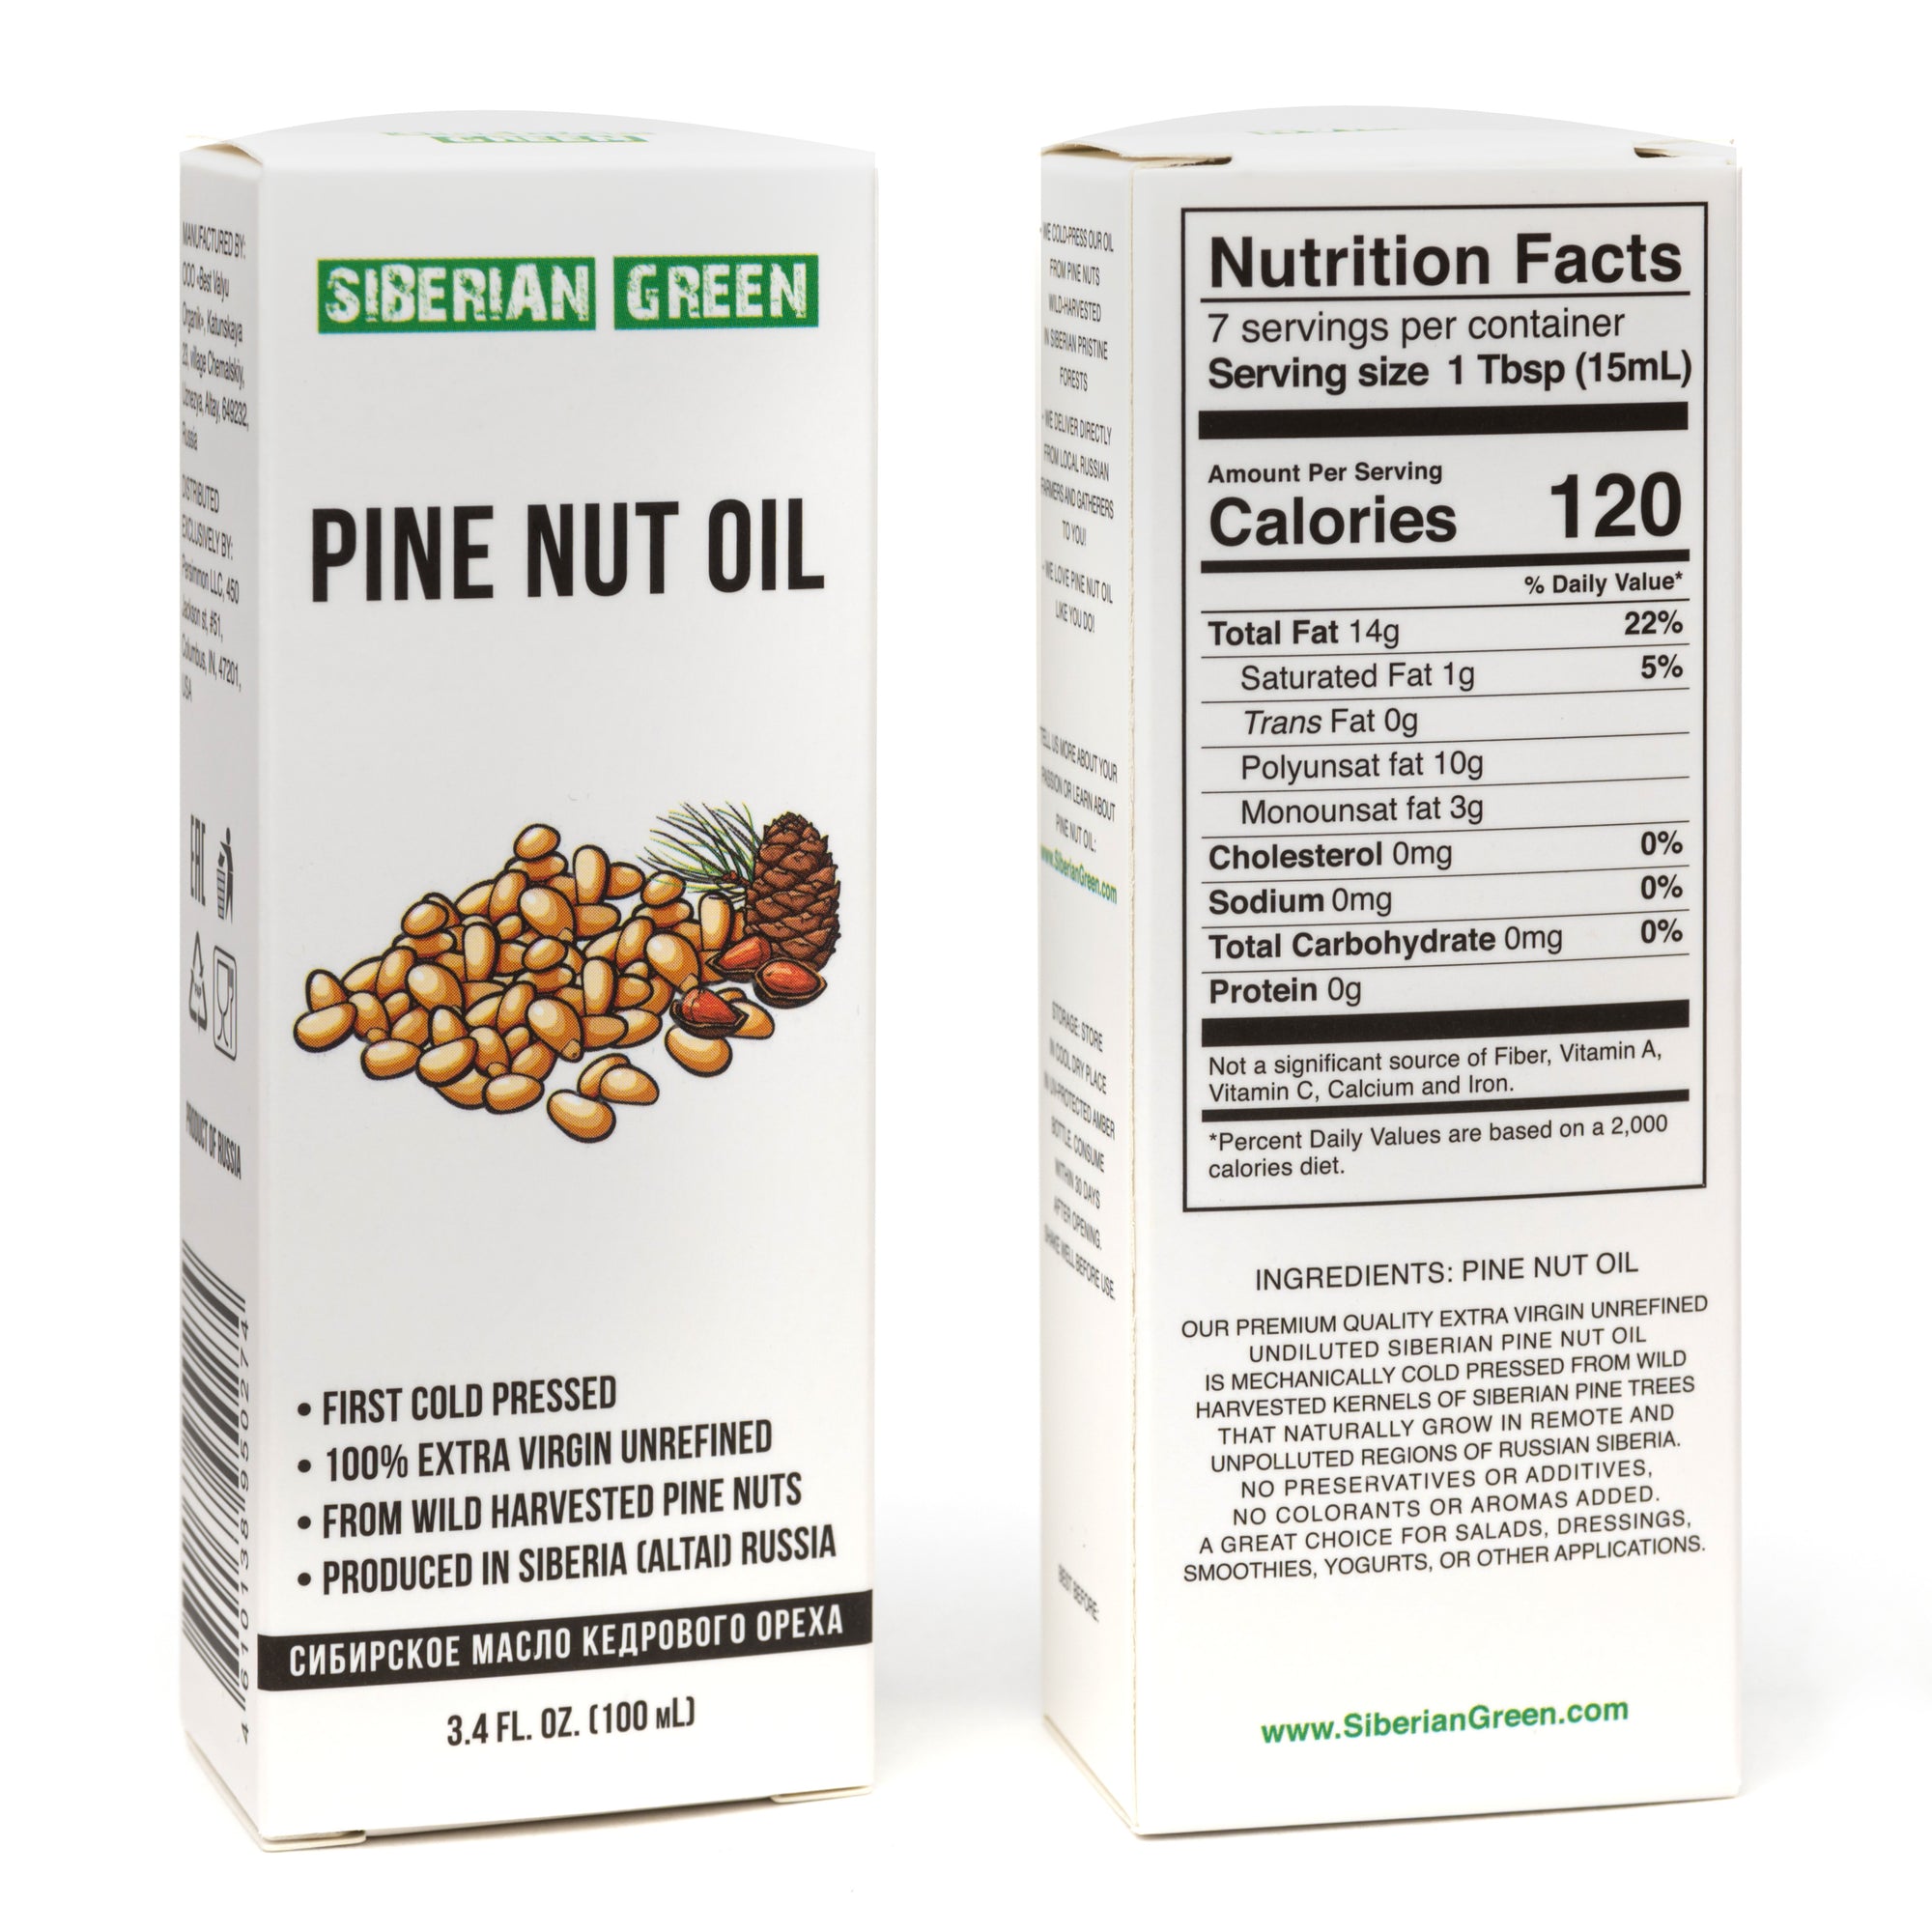 Pinolenic acid in Siberian pine nut oil: what do we know from scientific research?